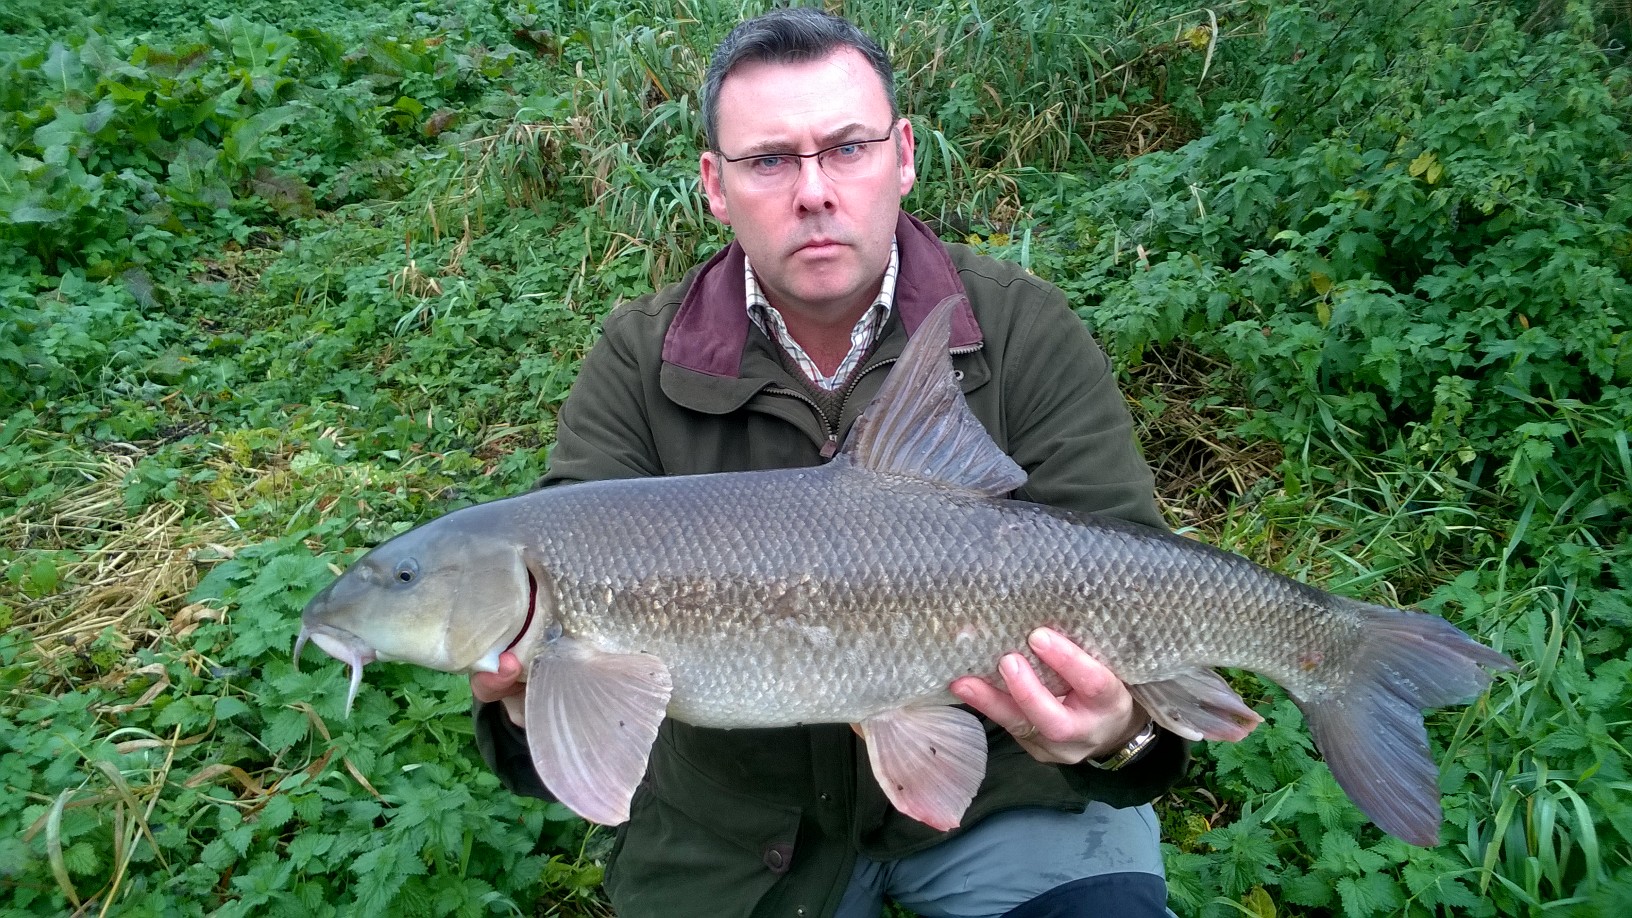 A PERSONAL BEST BARBEL FOR ANDREW